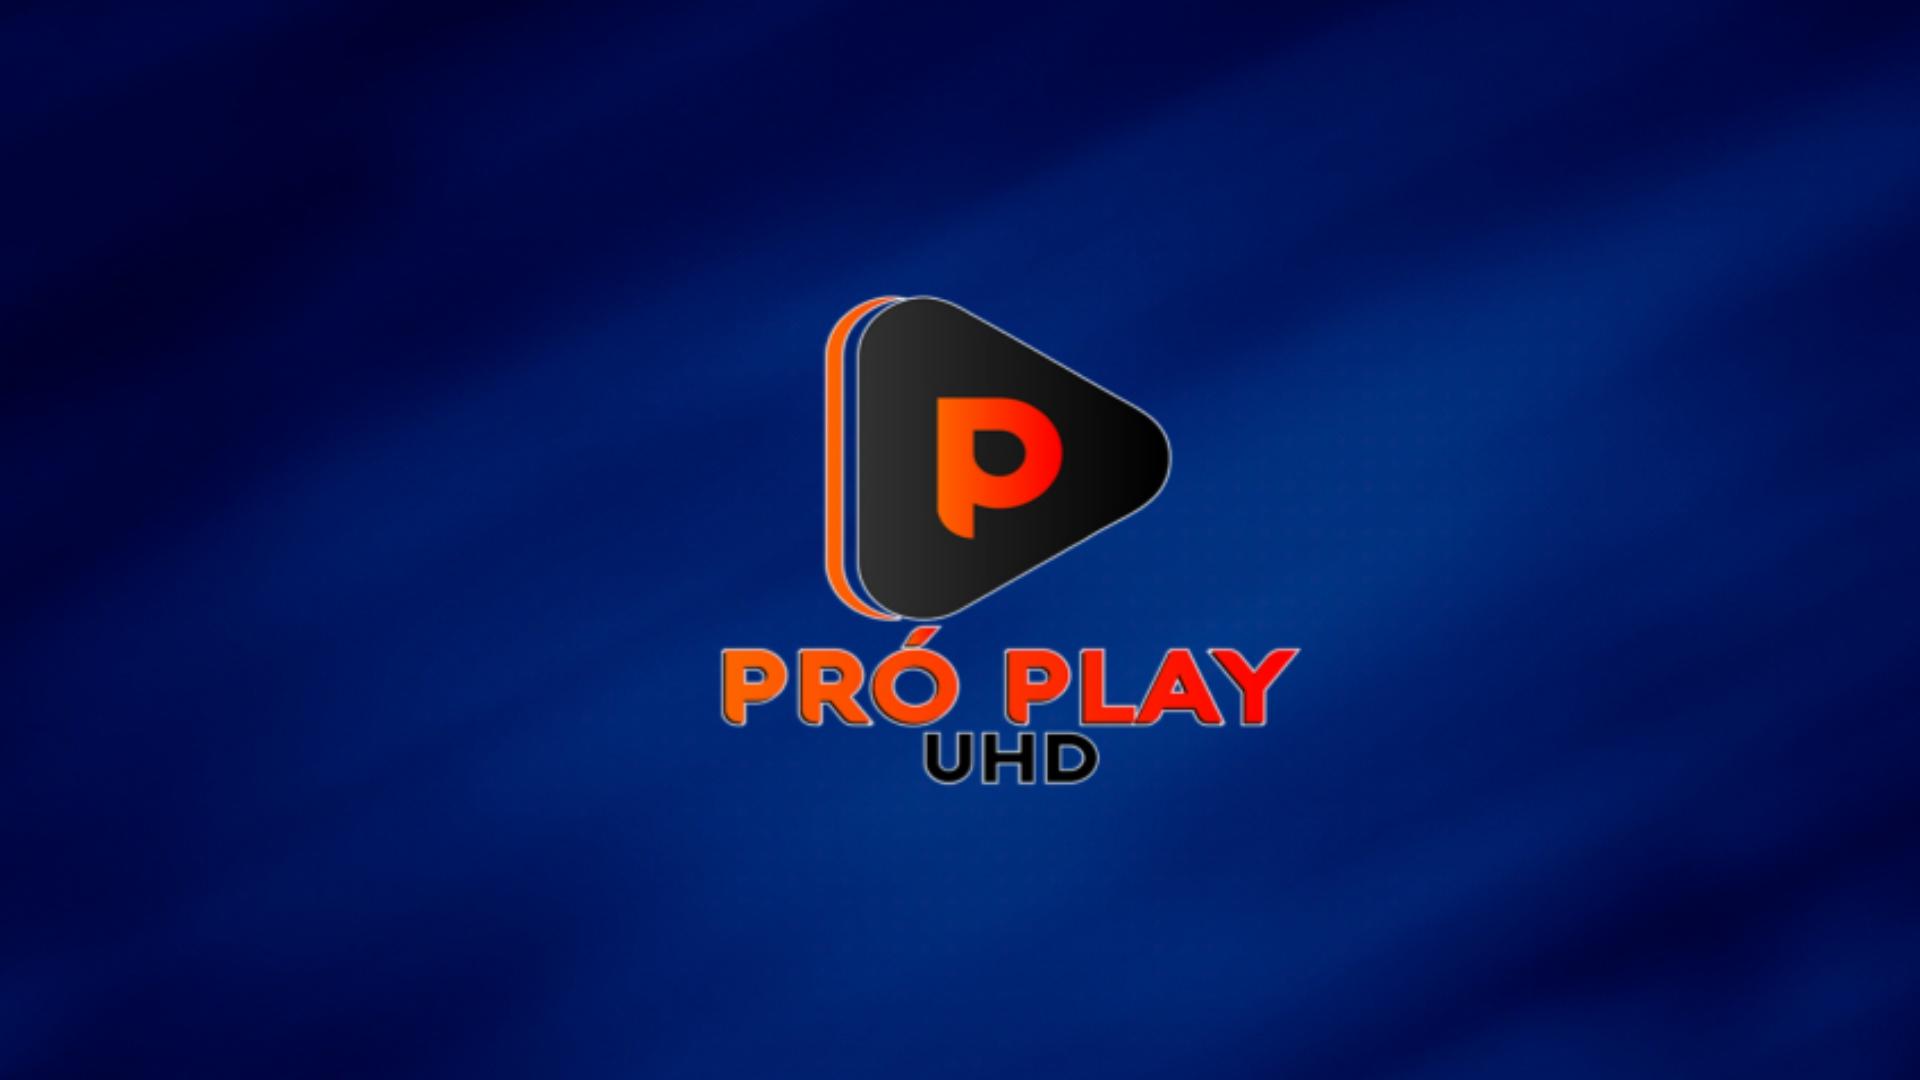 P Play. P is Play. P player